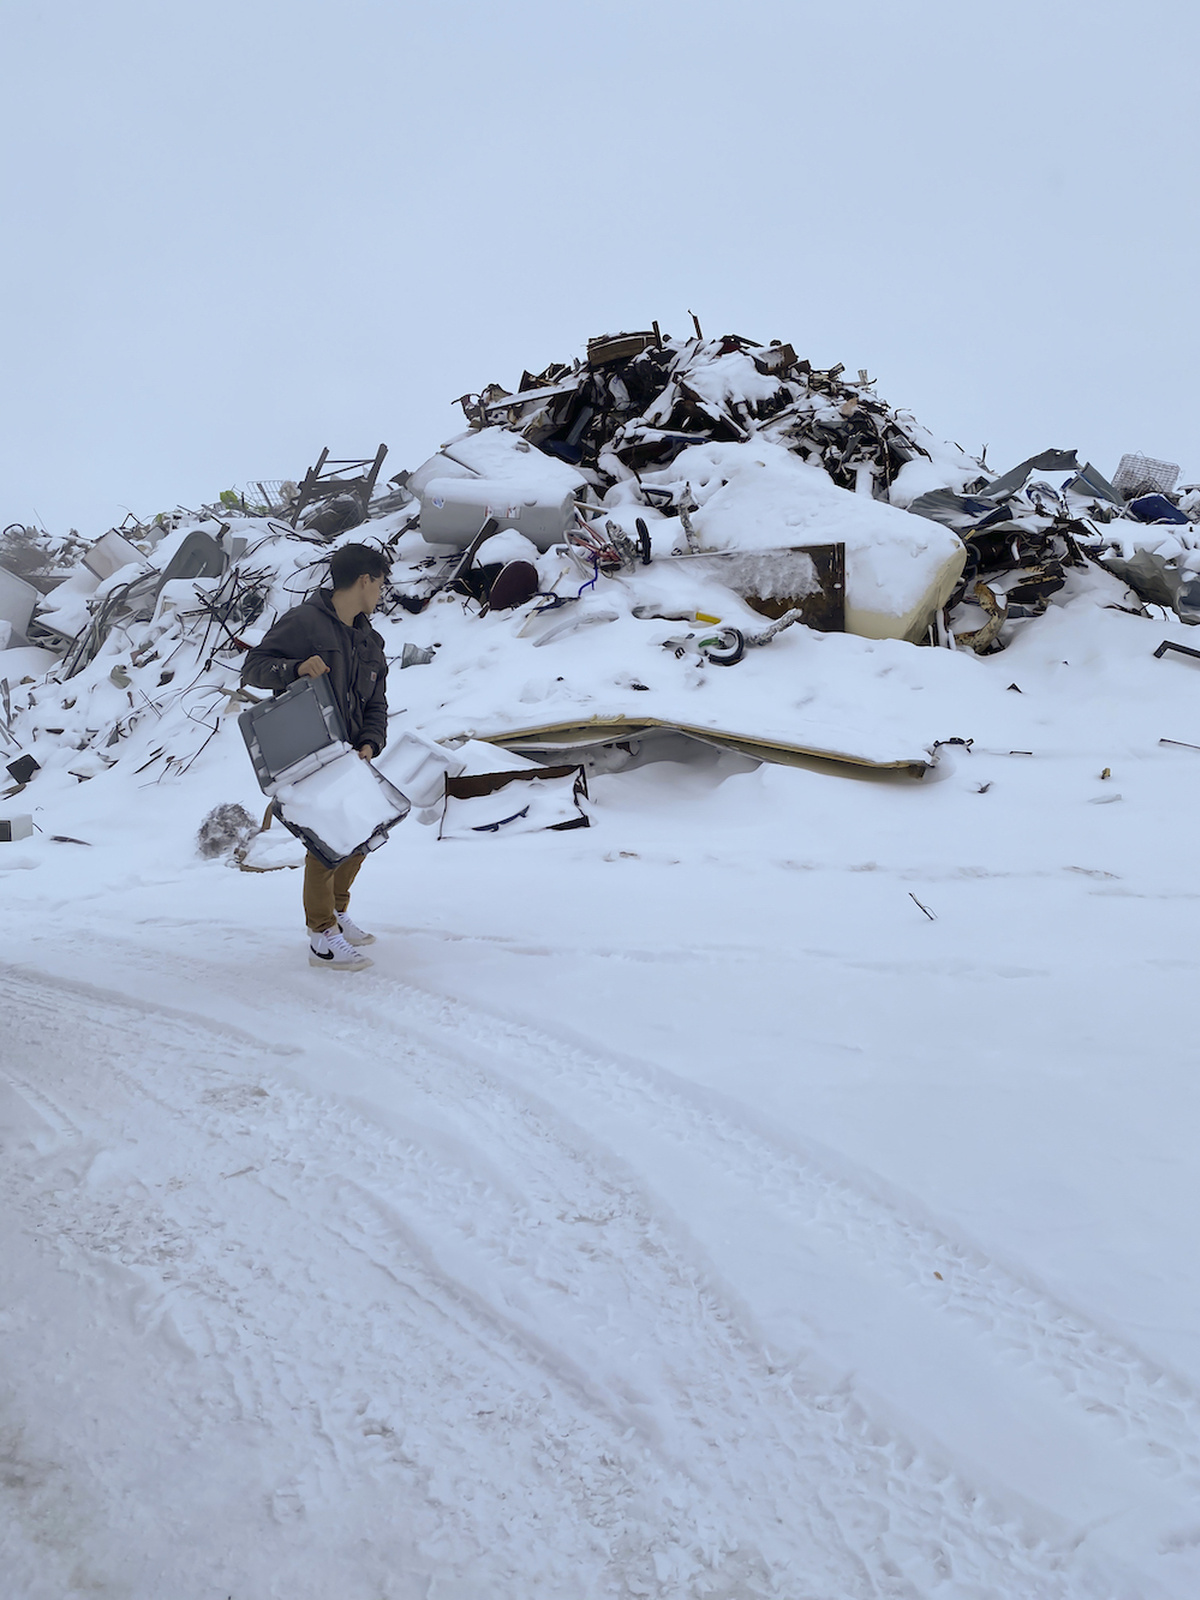 A person throws a suitcase on to a pile of discarded furniture and other rubbish. The ground and pile is covered in snow